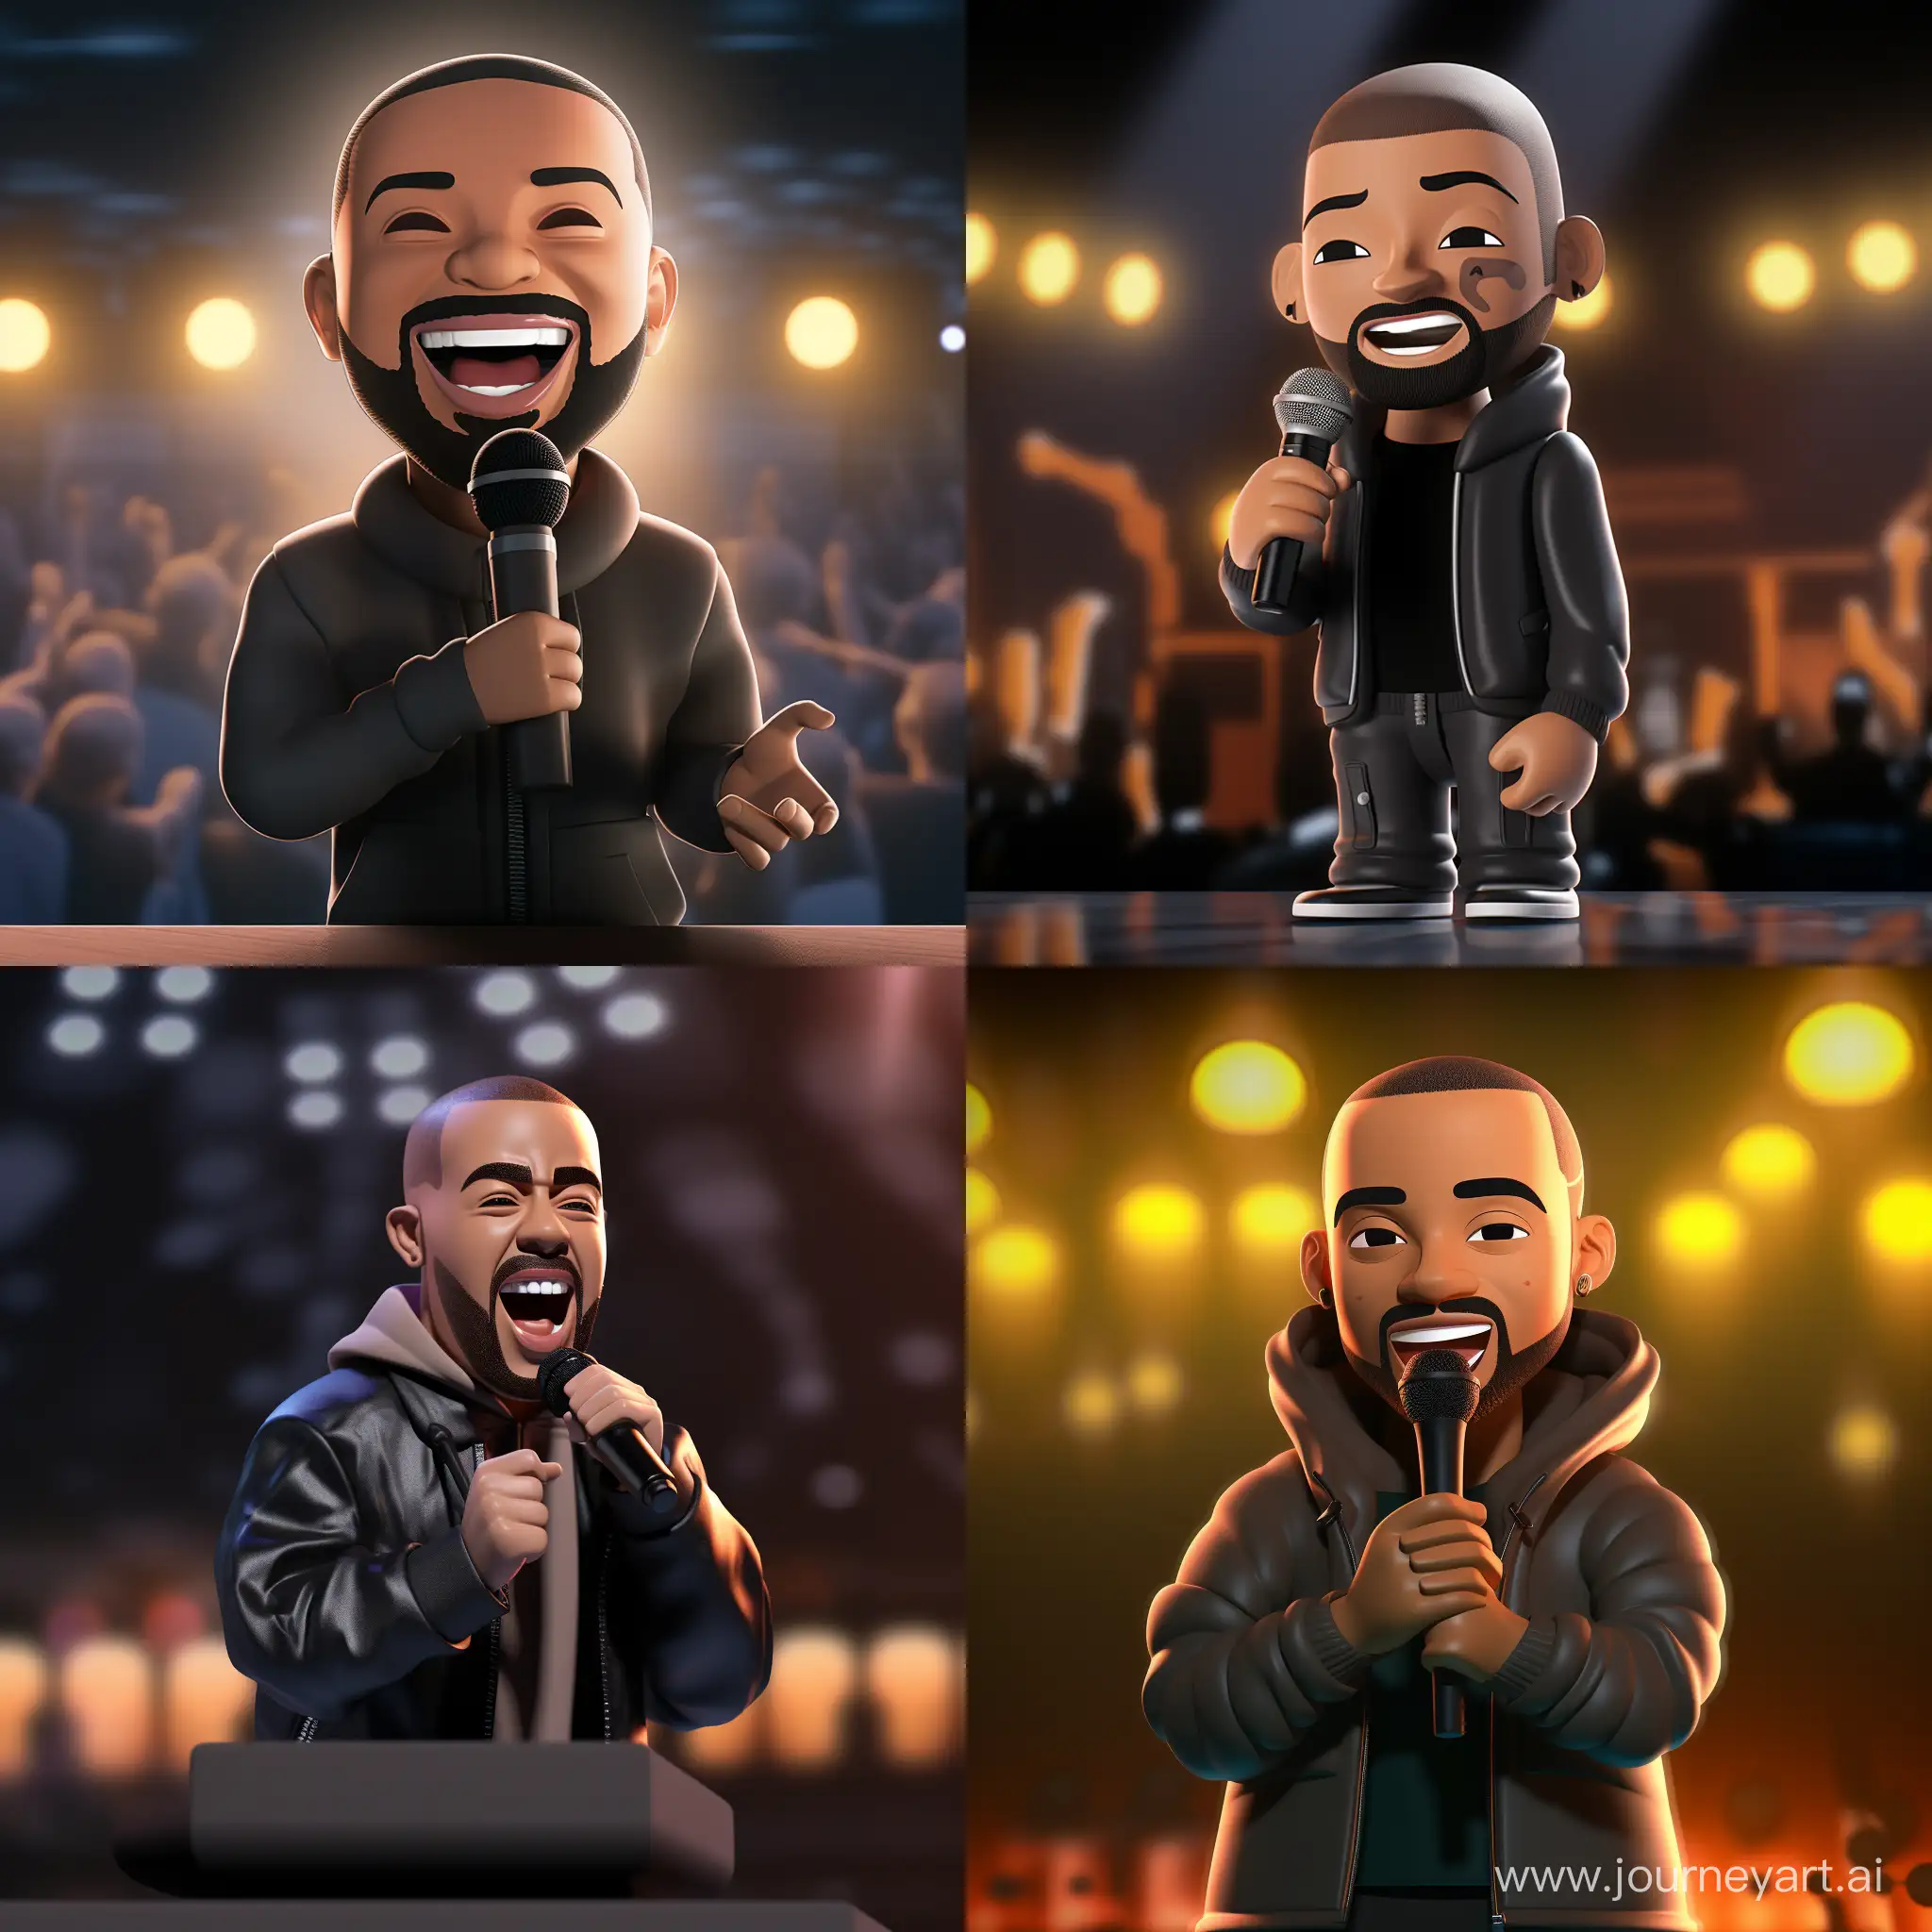 A LEGO representation of a smiling African-American individual with rounded facial features, sporting a short beard, dressed in loose dark clothing and a hoodie featuring a white dove with a microphone in hand. The figure has a buzz cut hairstyle and is depicted against a concert backdrop, singing on stage, with lights and speakers in the background
